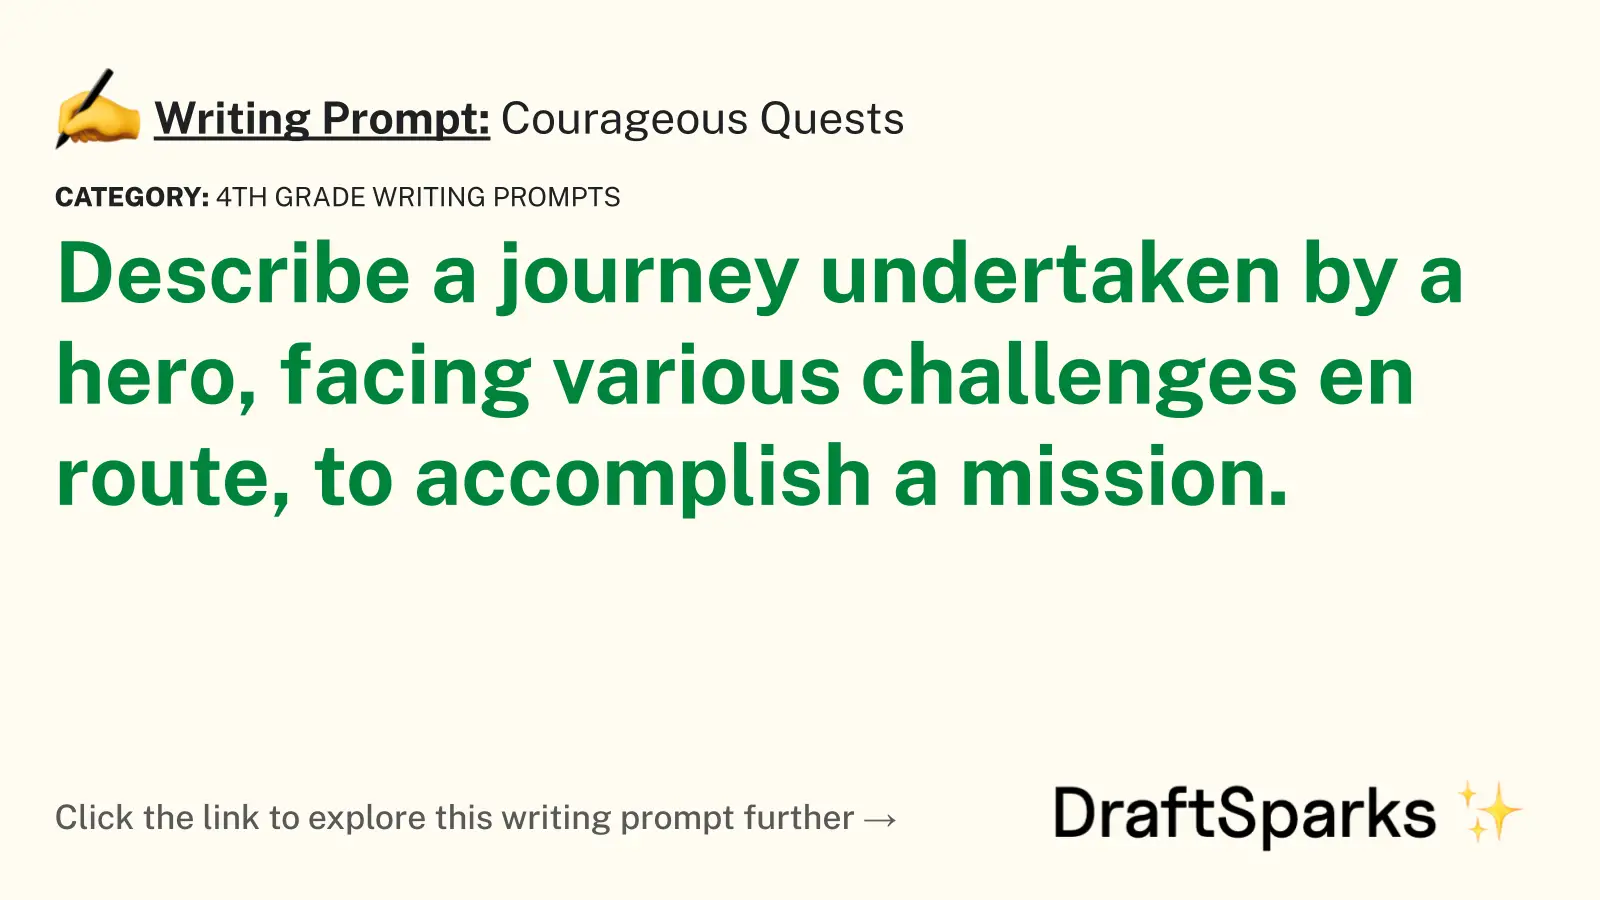 Courageous Quests